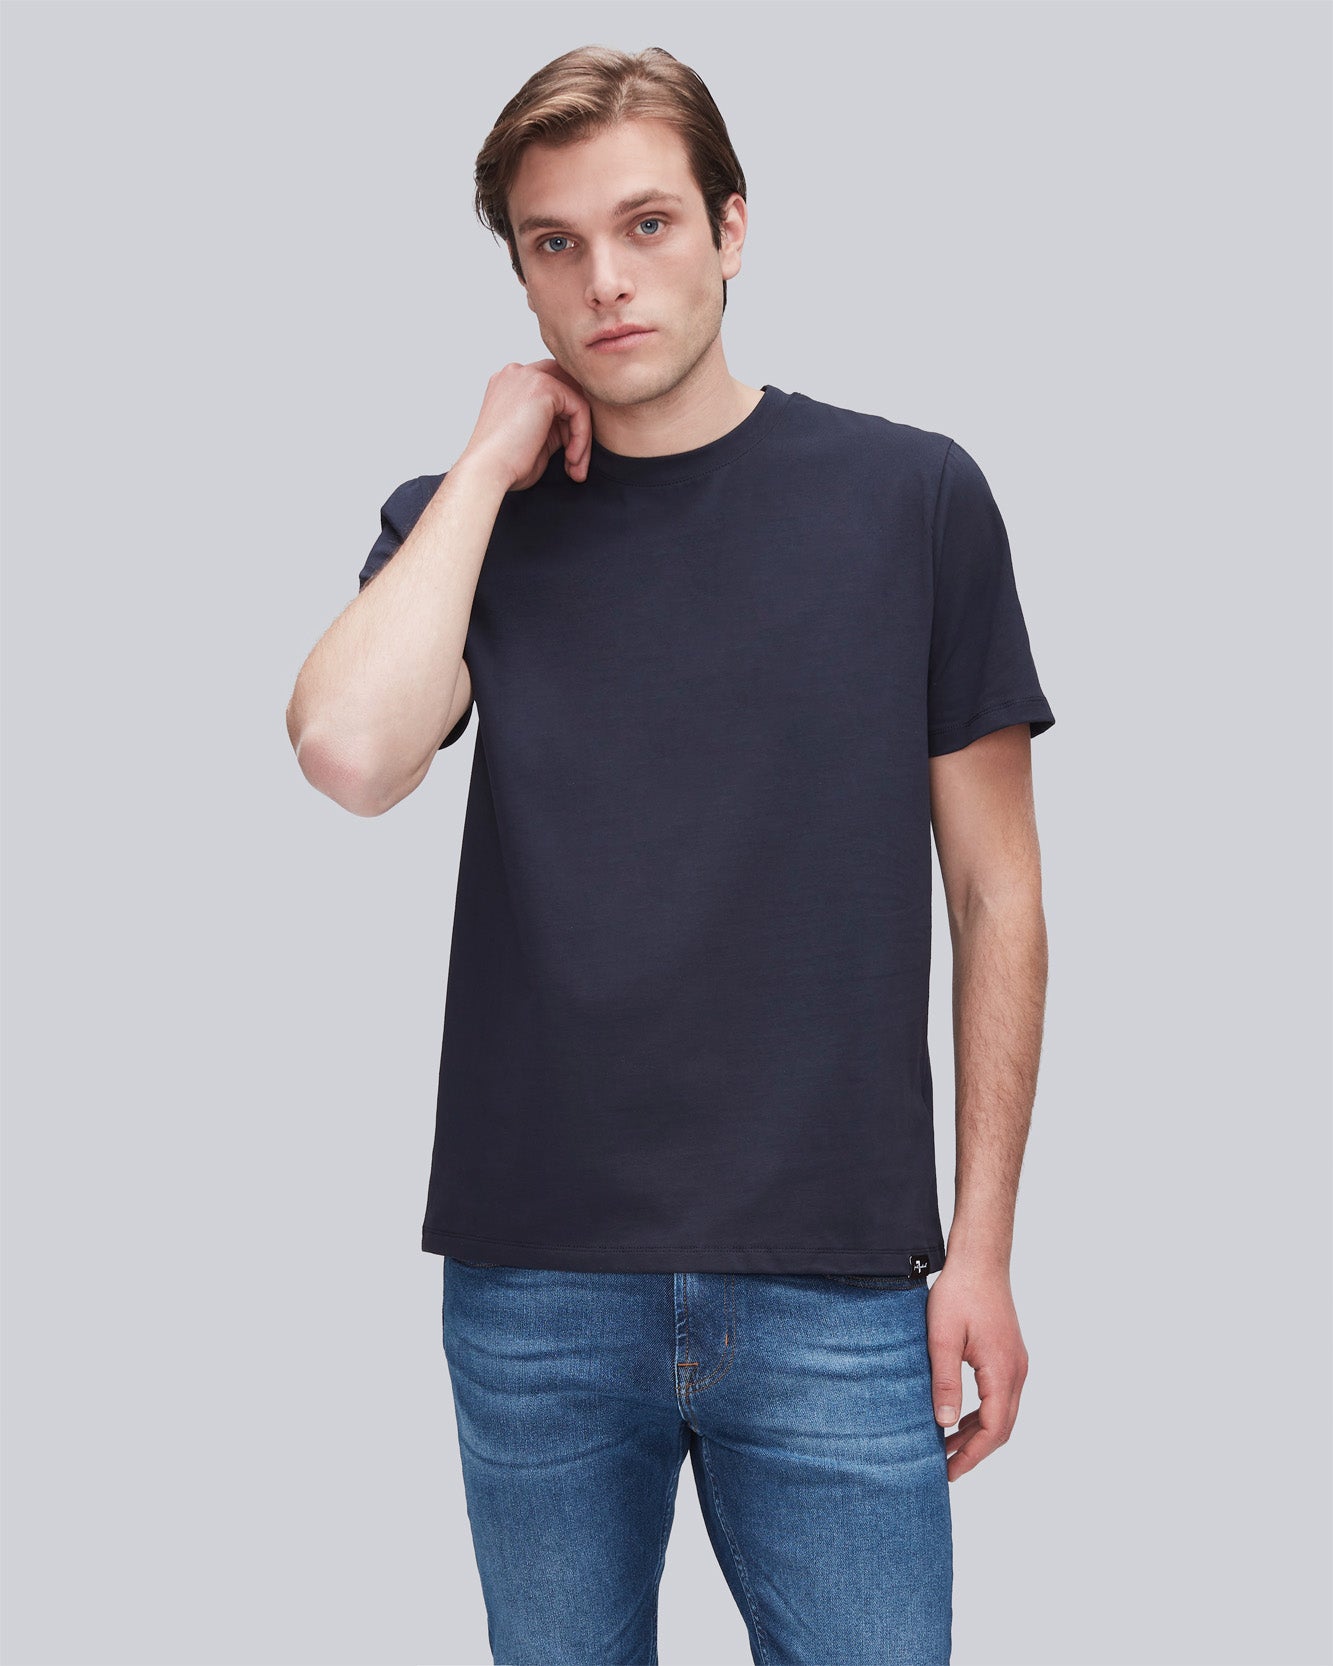 Luxe Performace Tee in Blue | 7 For All Mankind